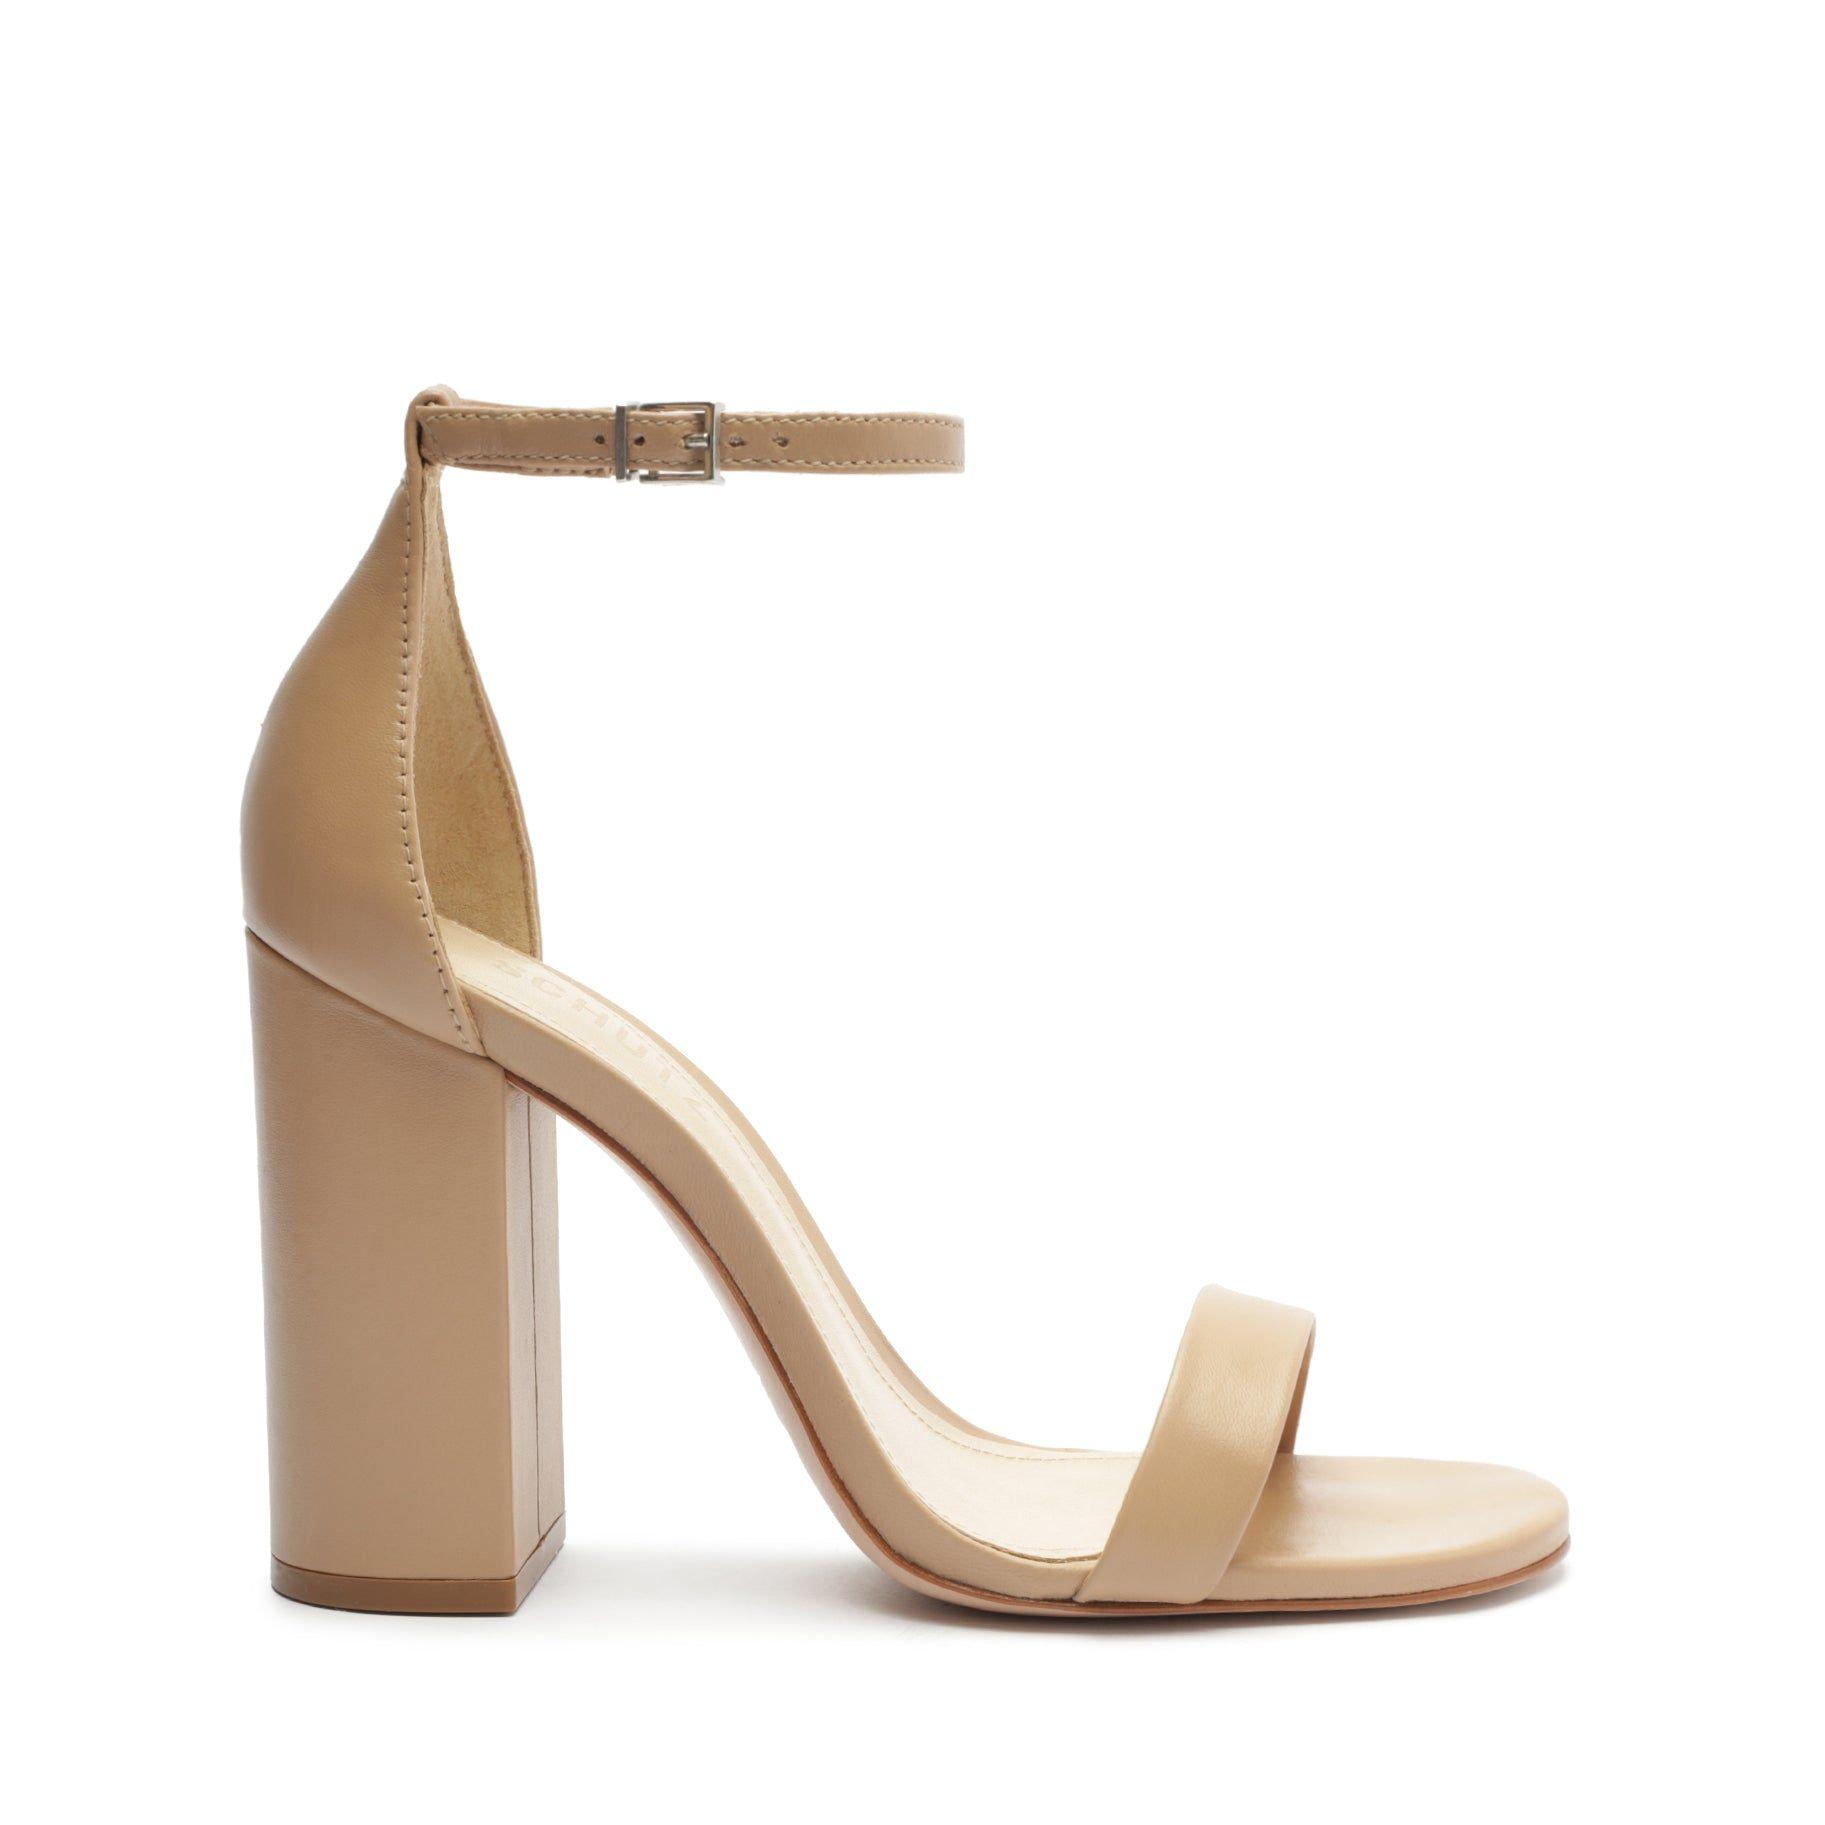 SCHUTZ SHOES Cadey Lee Block Nappa Leather Sandal in White | Lyst